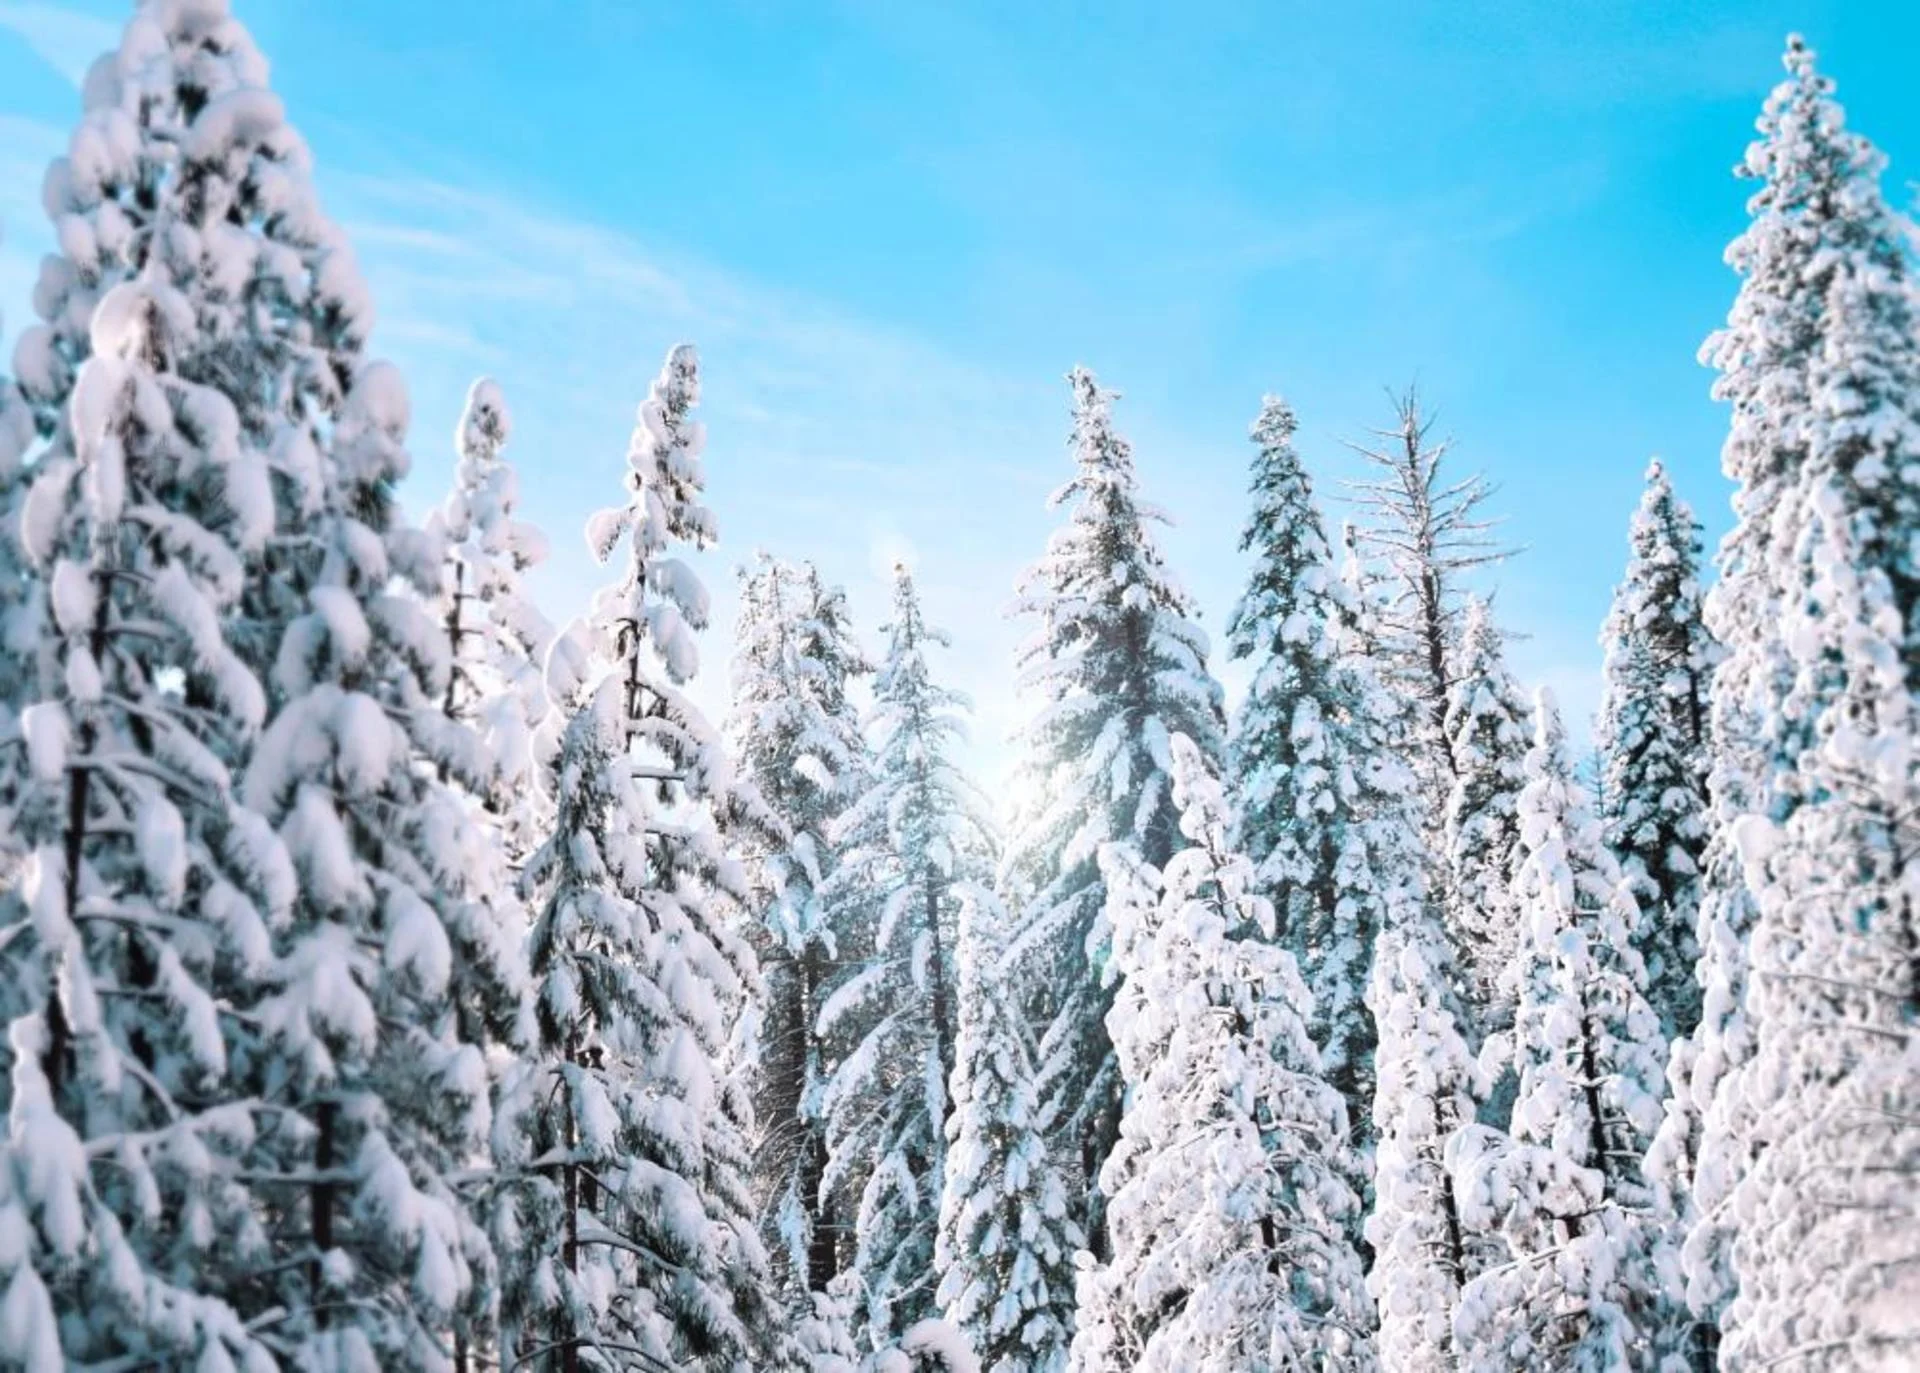 How snow cover in forests can help predict flood risks